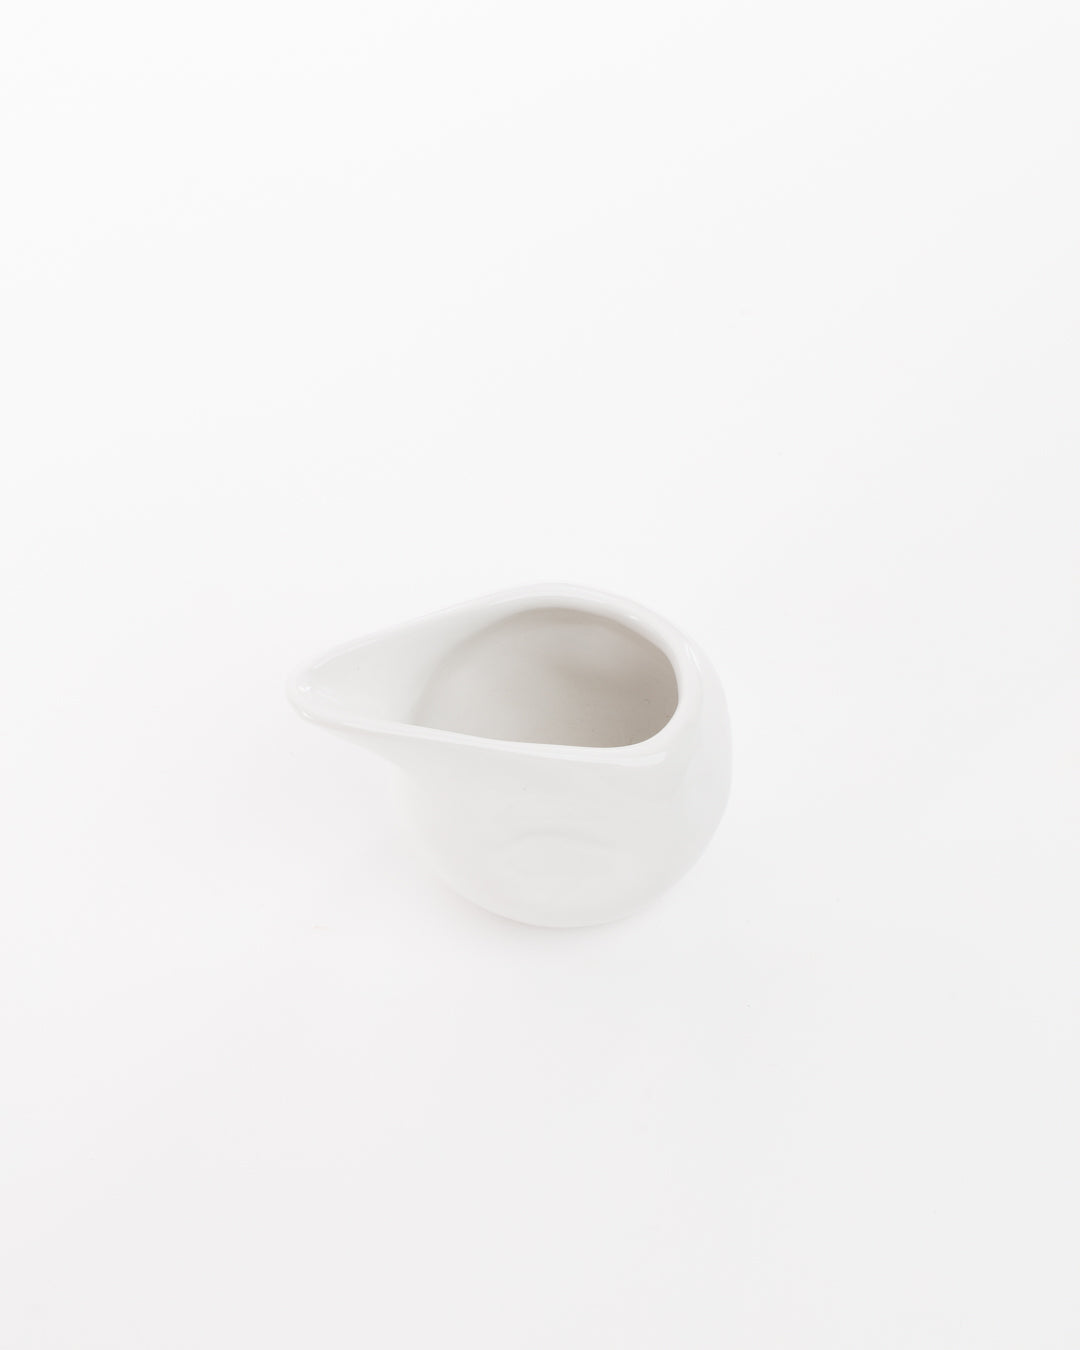 A small, white ceramic pitcher with a round body and a narrow spout, crafted using traditional techniques, set against a plain white background. The handmade ceramic dinnerware piece - the Gravy Boat 374 by Montes Doggett - is viewed from above, slightly tilted, showing the opening and inner part.